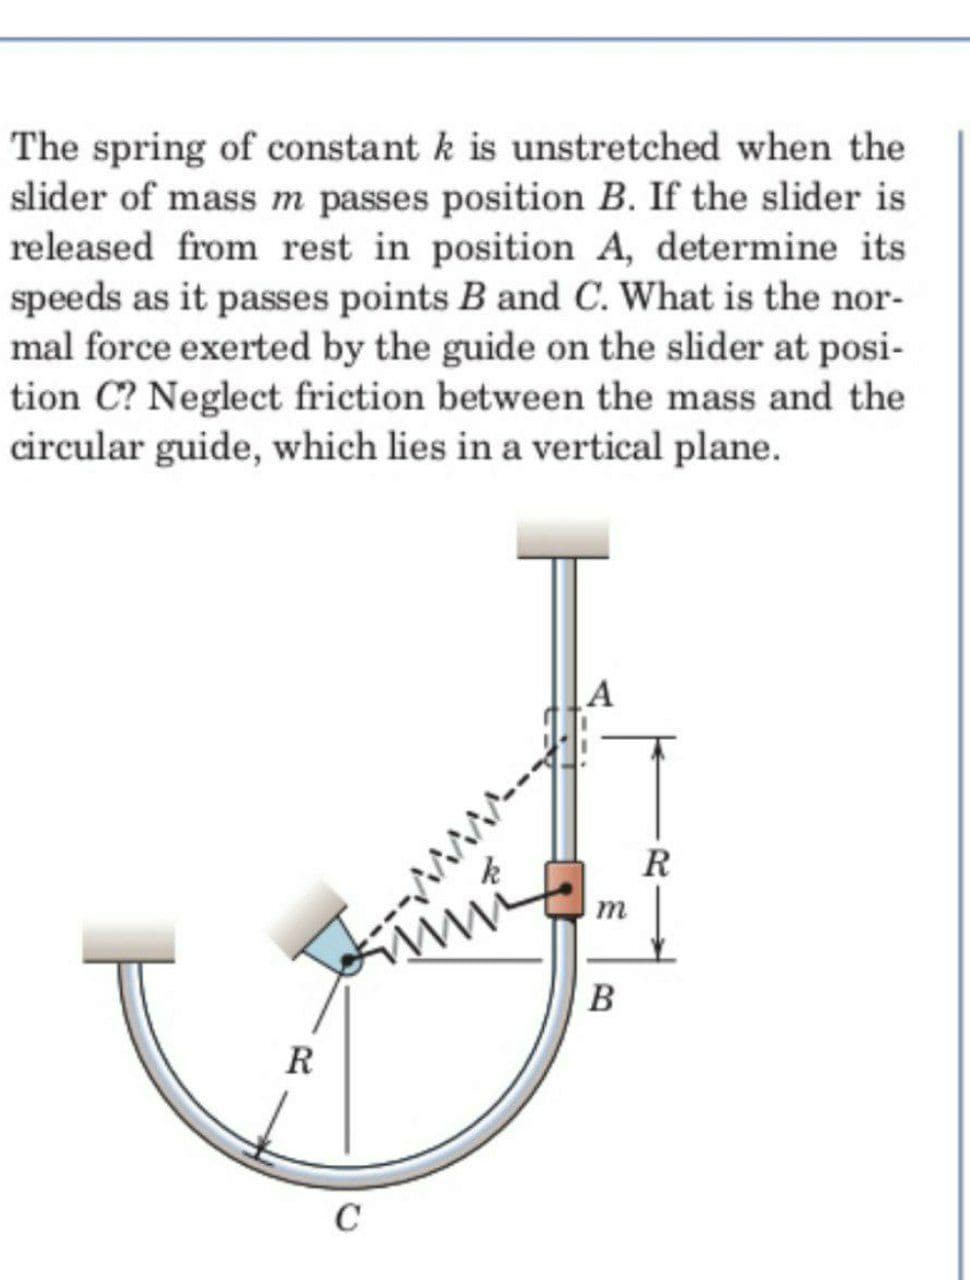 The spring of constant k is unstretched when the
slider of mass m passes position B. If the slider is
released from rest in position A, determine its
speeds as it passes points B and C. What is the nor-
mal force exerted by the guide on the slider at posi-
tion C? Neglect friction between the mass and the
circular guide, which lies in a vertical plane.
A
R
k
www
C
m
B
R